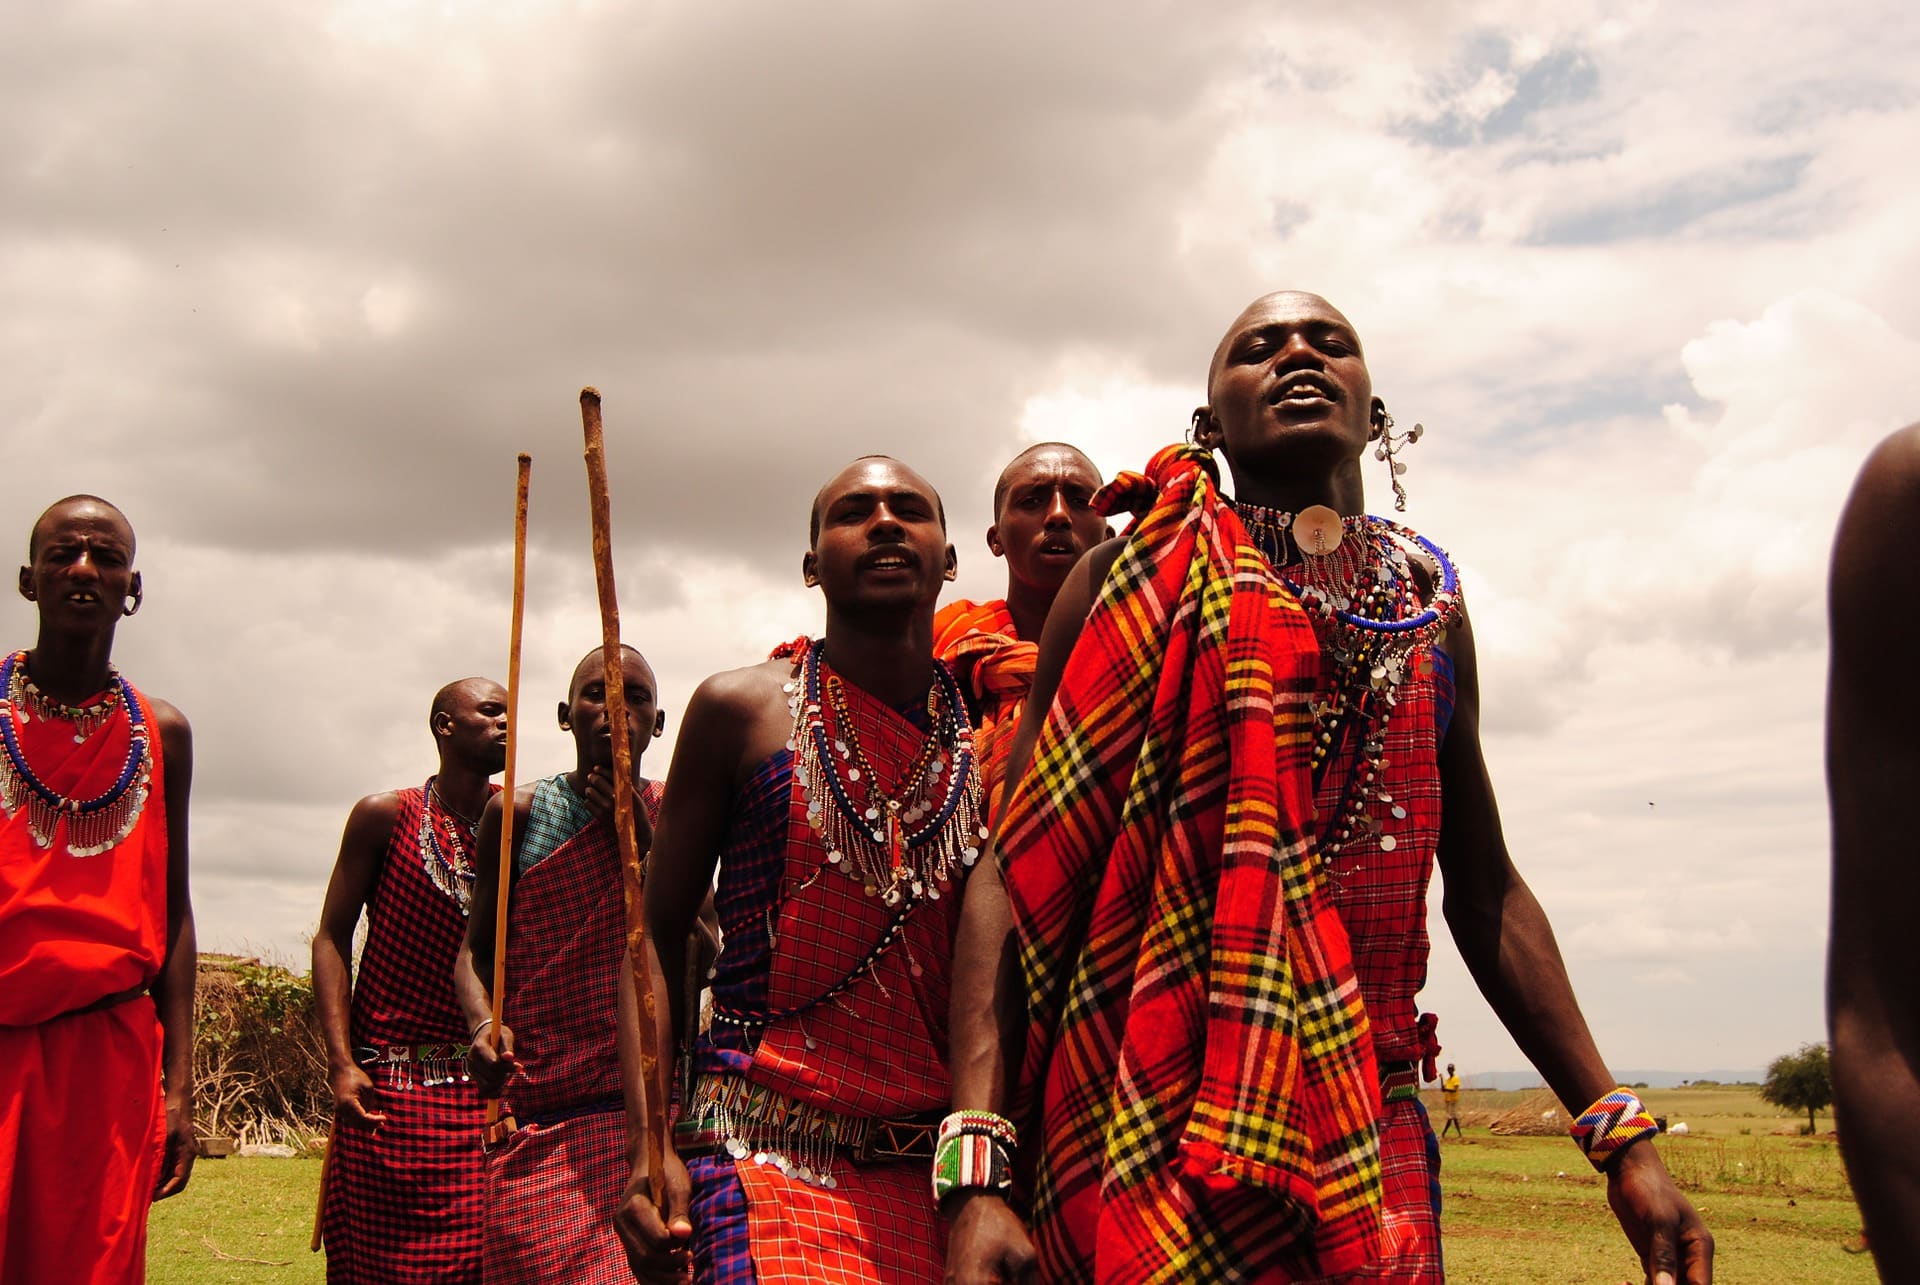 experience the Masai Mara culture in our tour packages